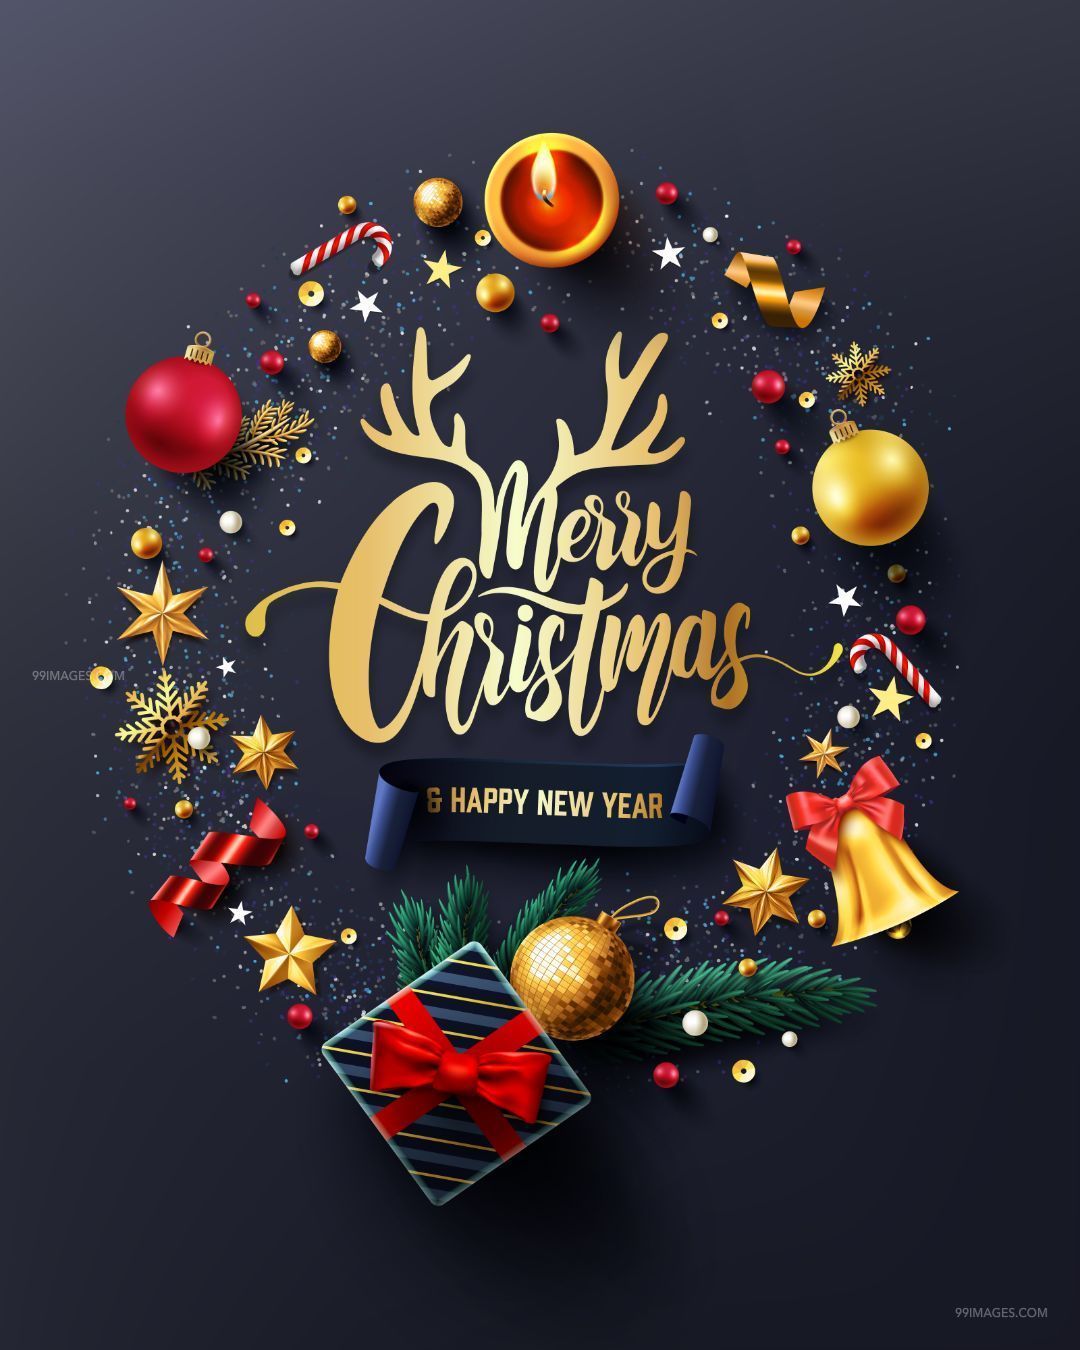 Merry Christmas 2019 Wallpapers